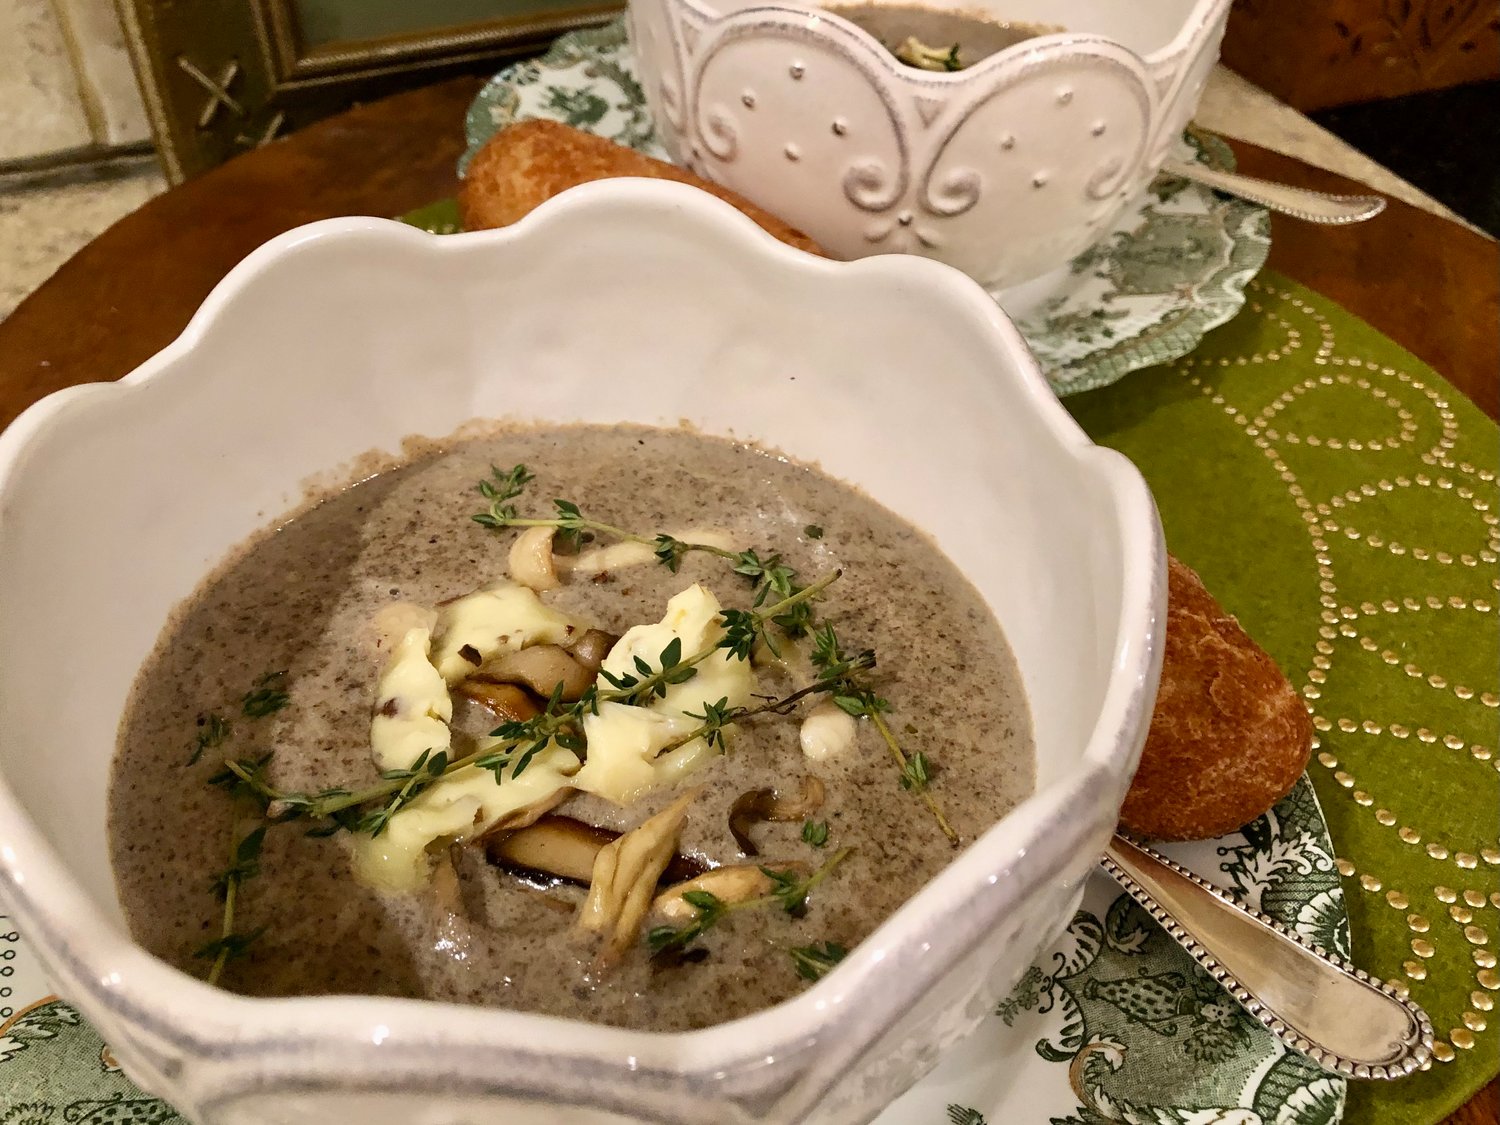 This version of chef Fraser Ellis’ mushroom bisque is topped with sautéed mushrooms and brie cheese.